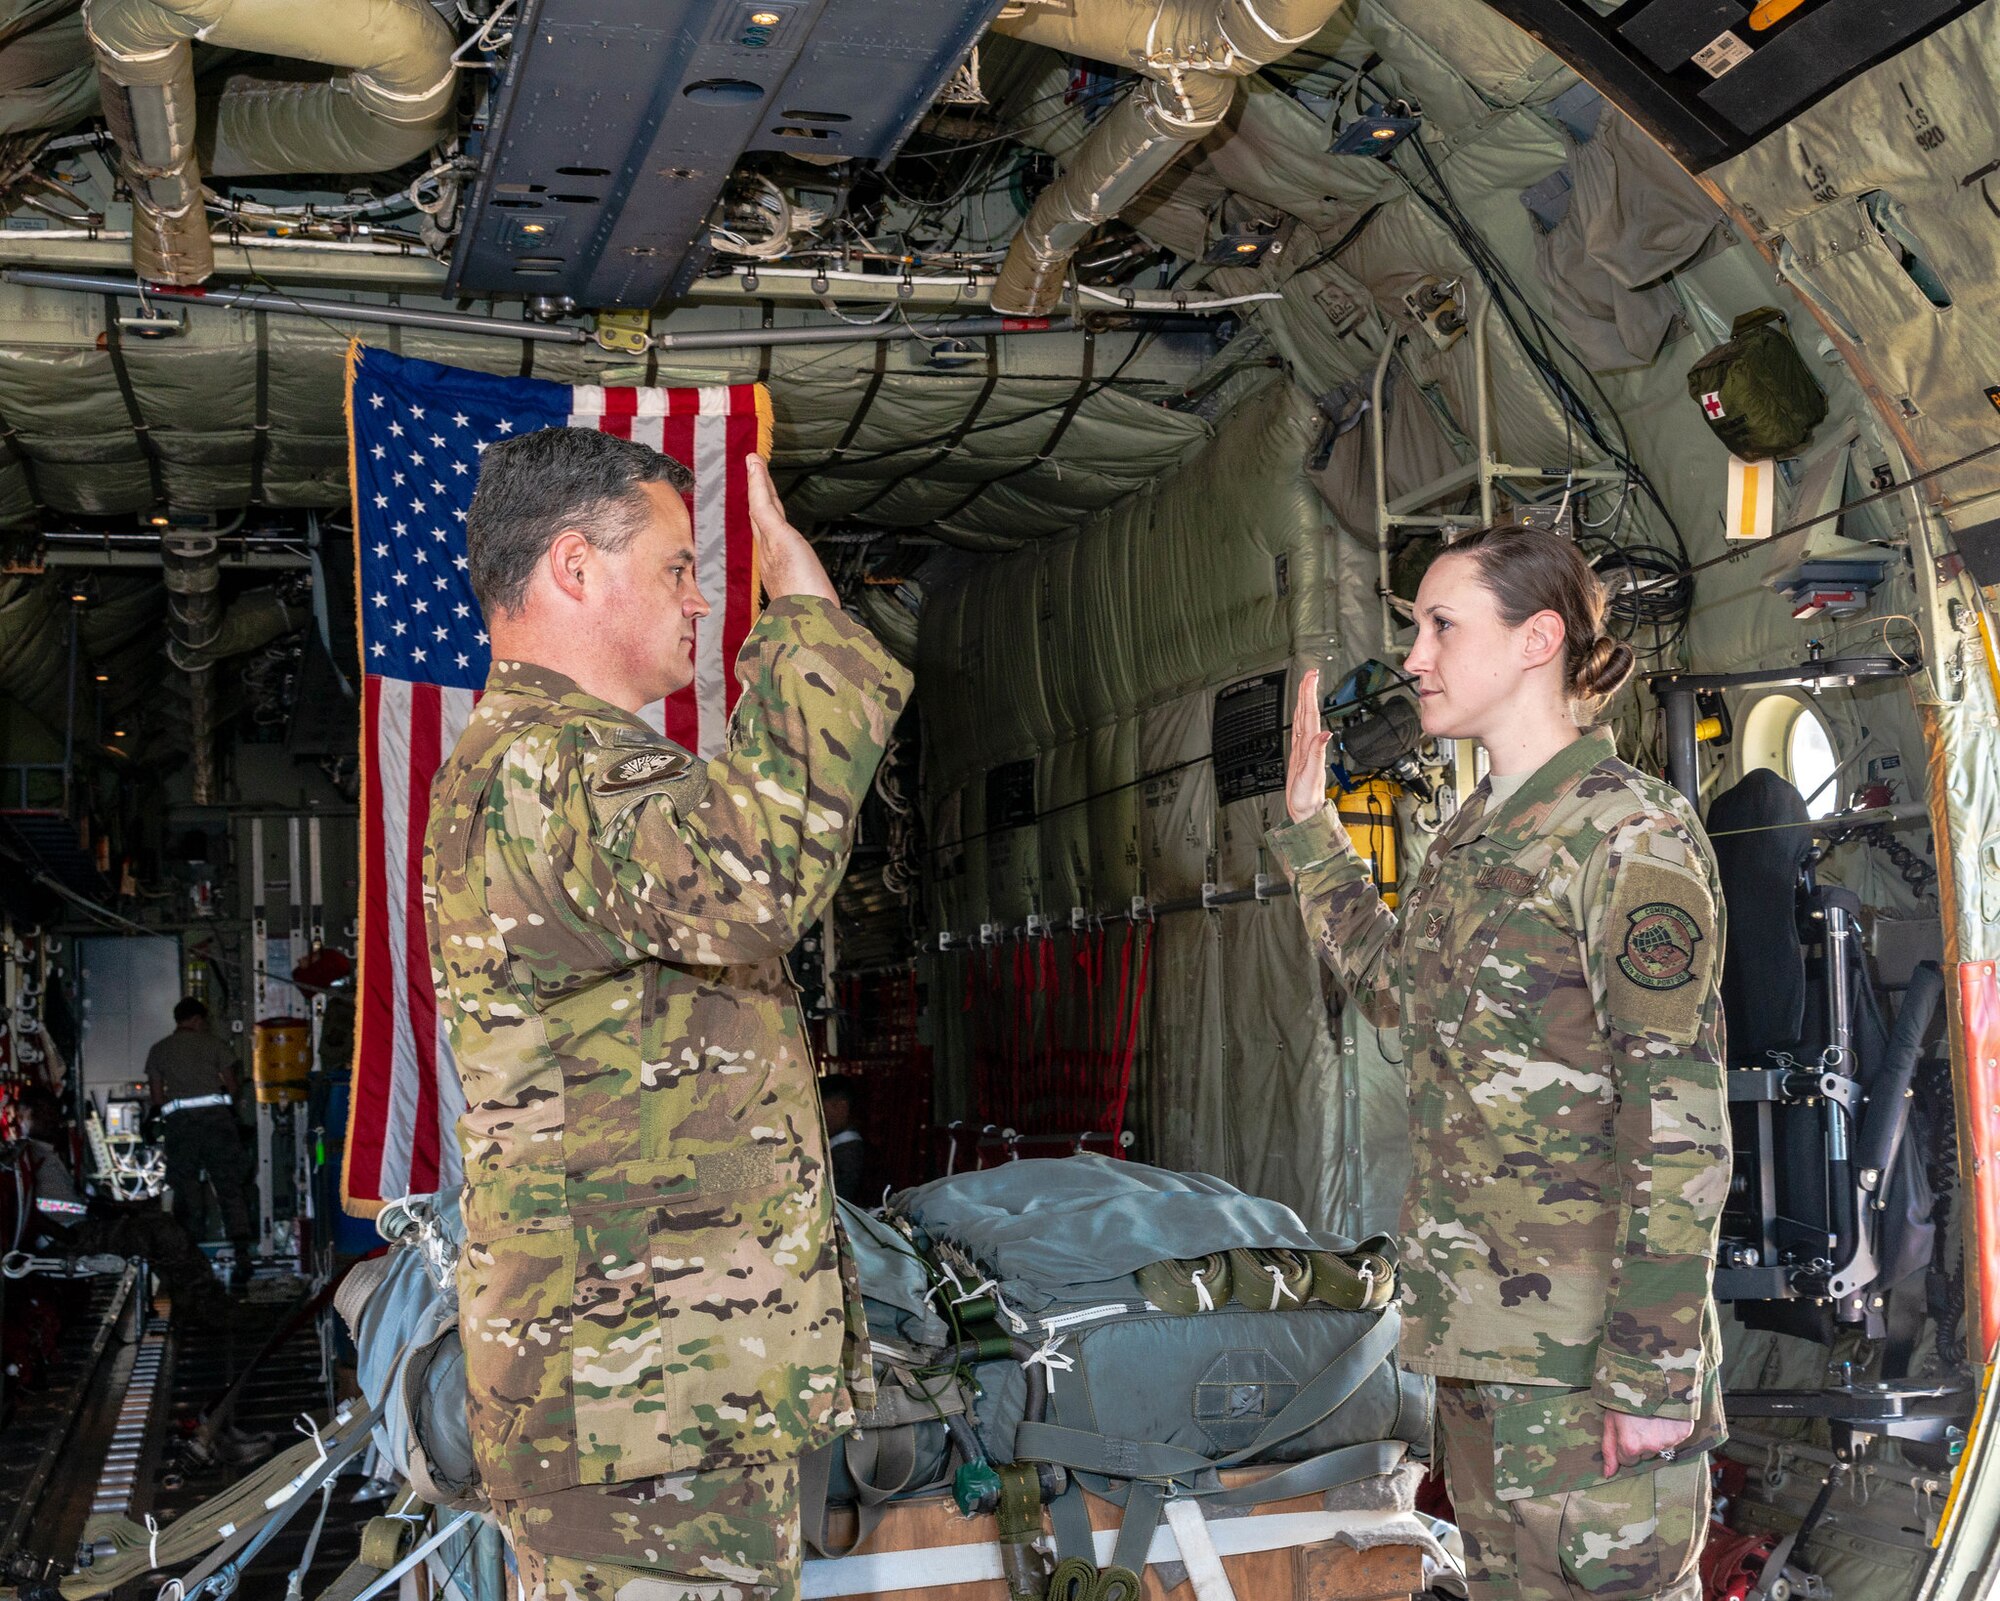 Tech. Sgt. Alex Erwin, 96th Aerial Port Squadron air transportation specialist, reenlists in the cargo area of a C-130J on April 15, 2019.